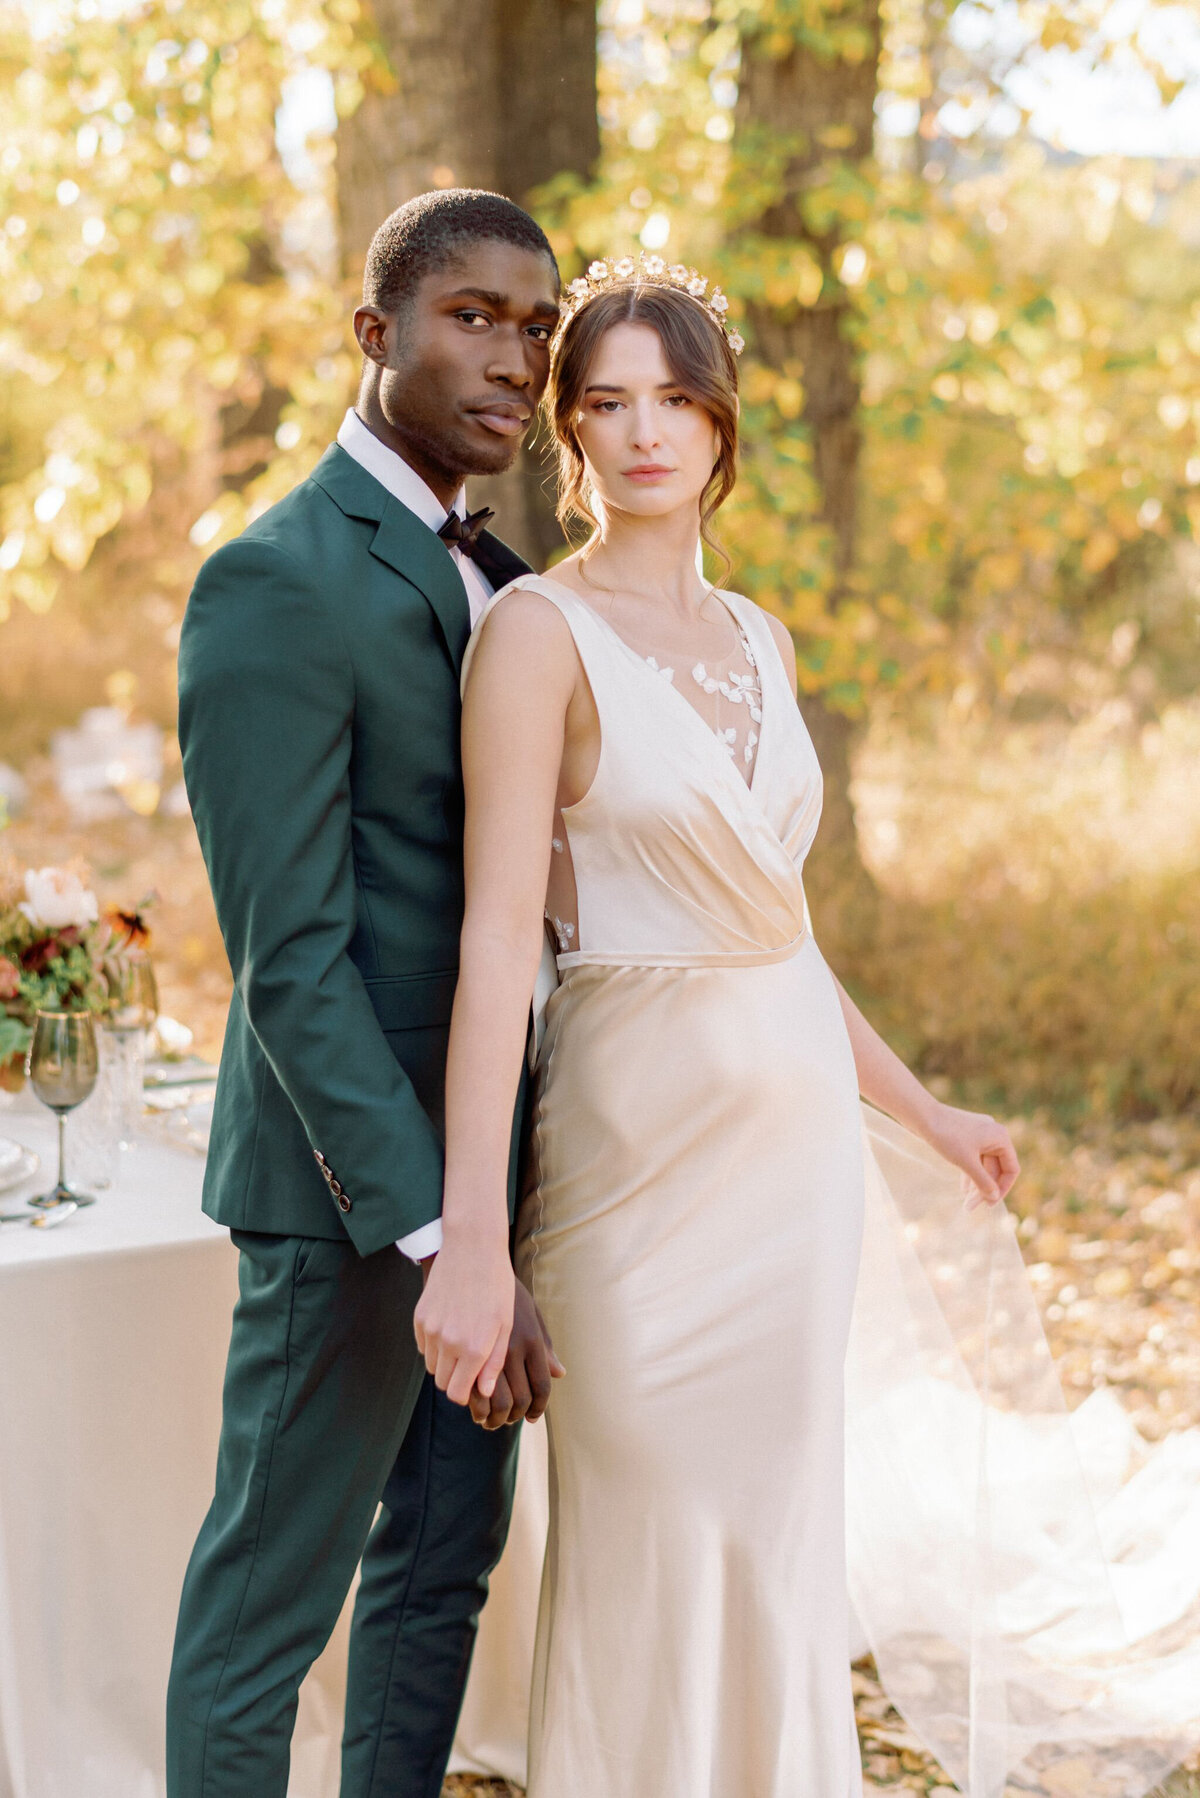 Elegant Fall inspired bride and groom portrait by Kaity Body Photography, film inspired wedding photographer in Calgary, Alberta. Featured on the Bronte Bride Vendor Guide.